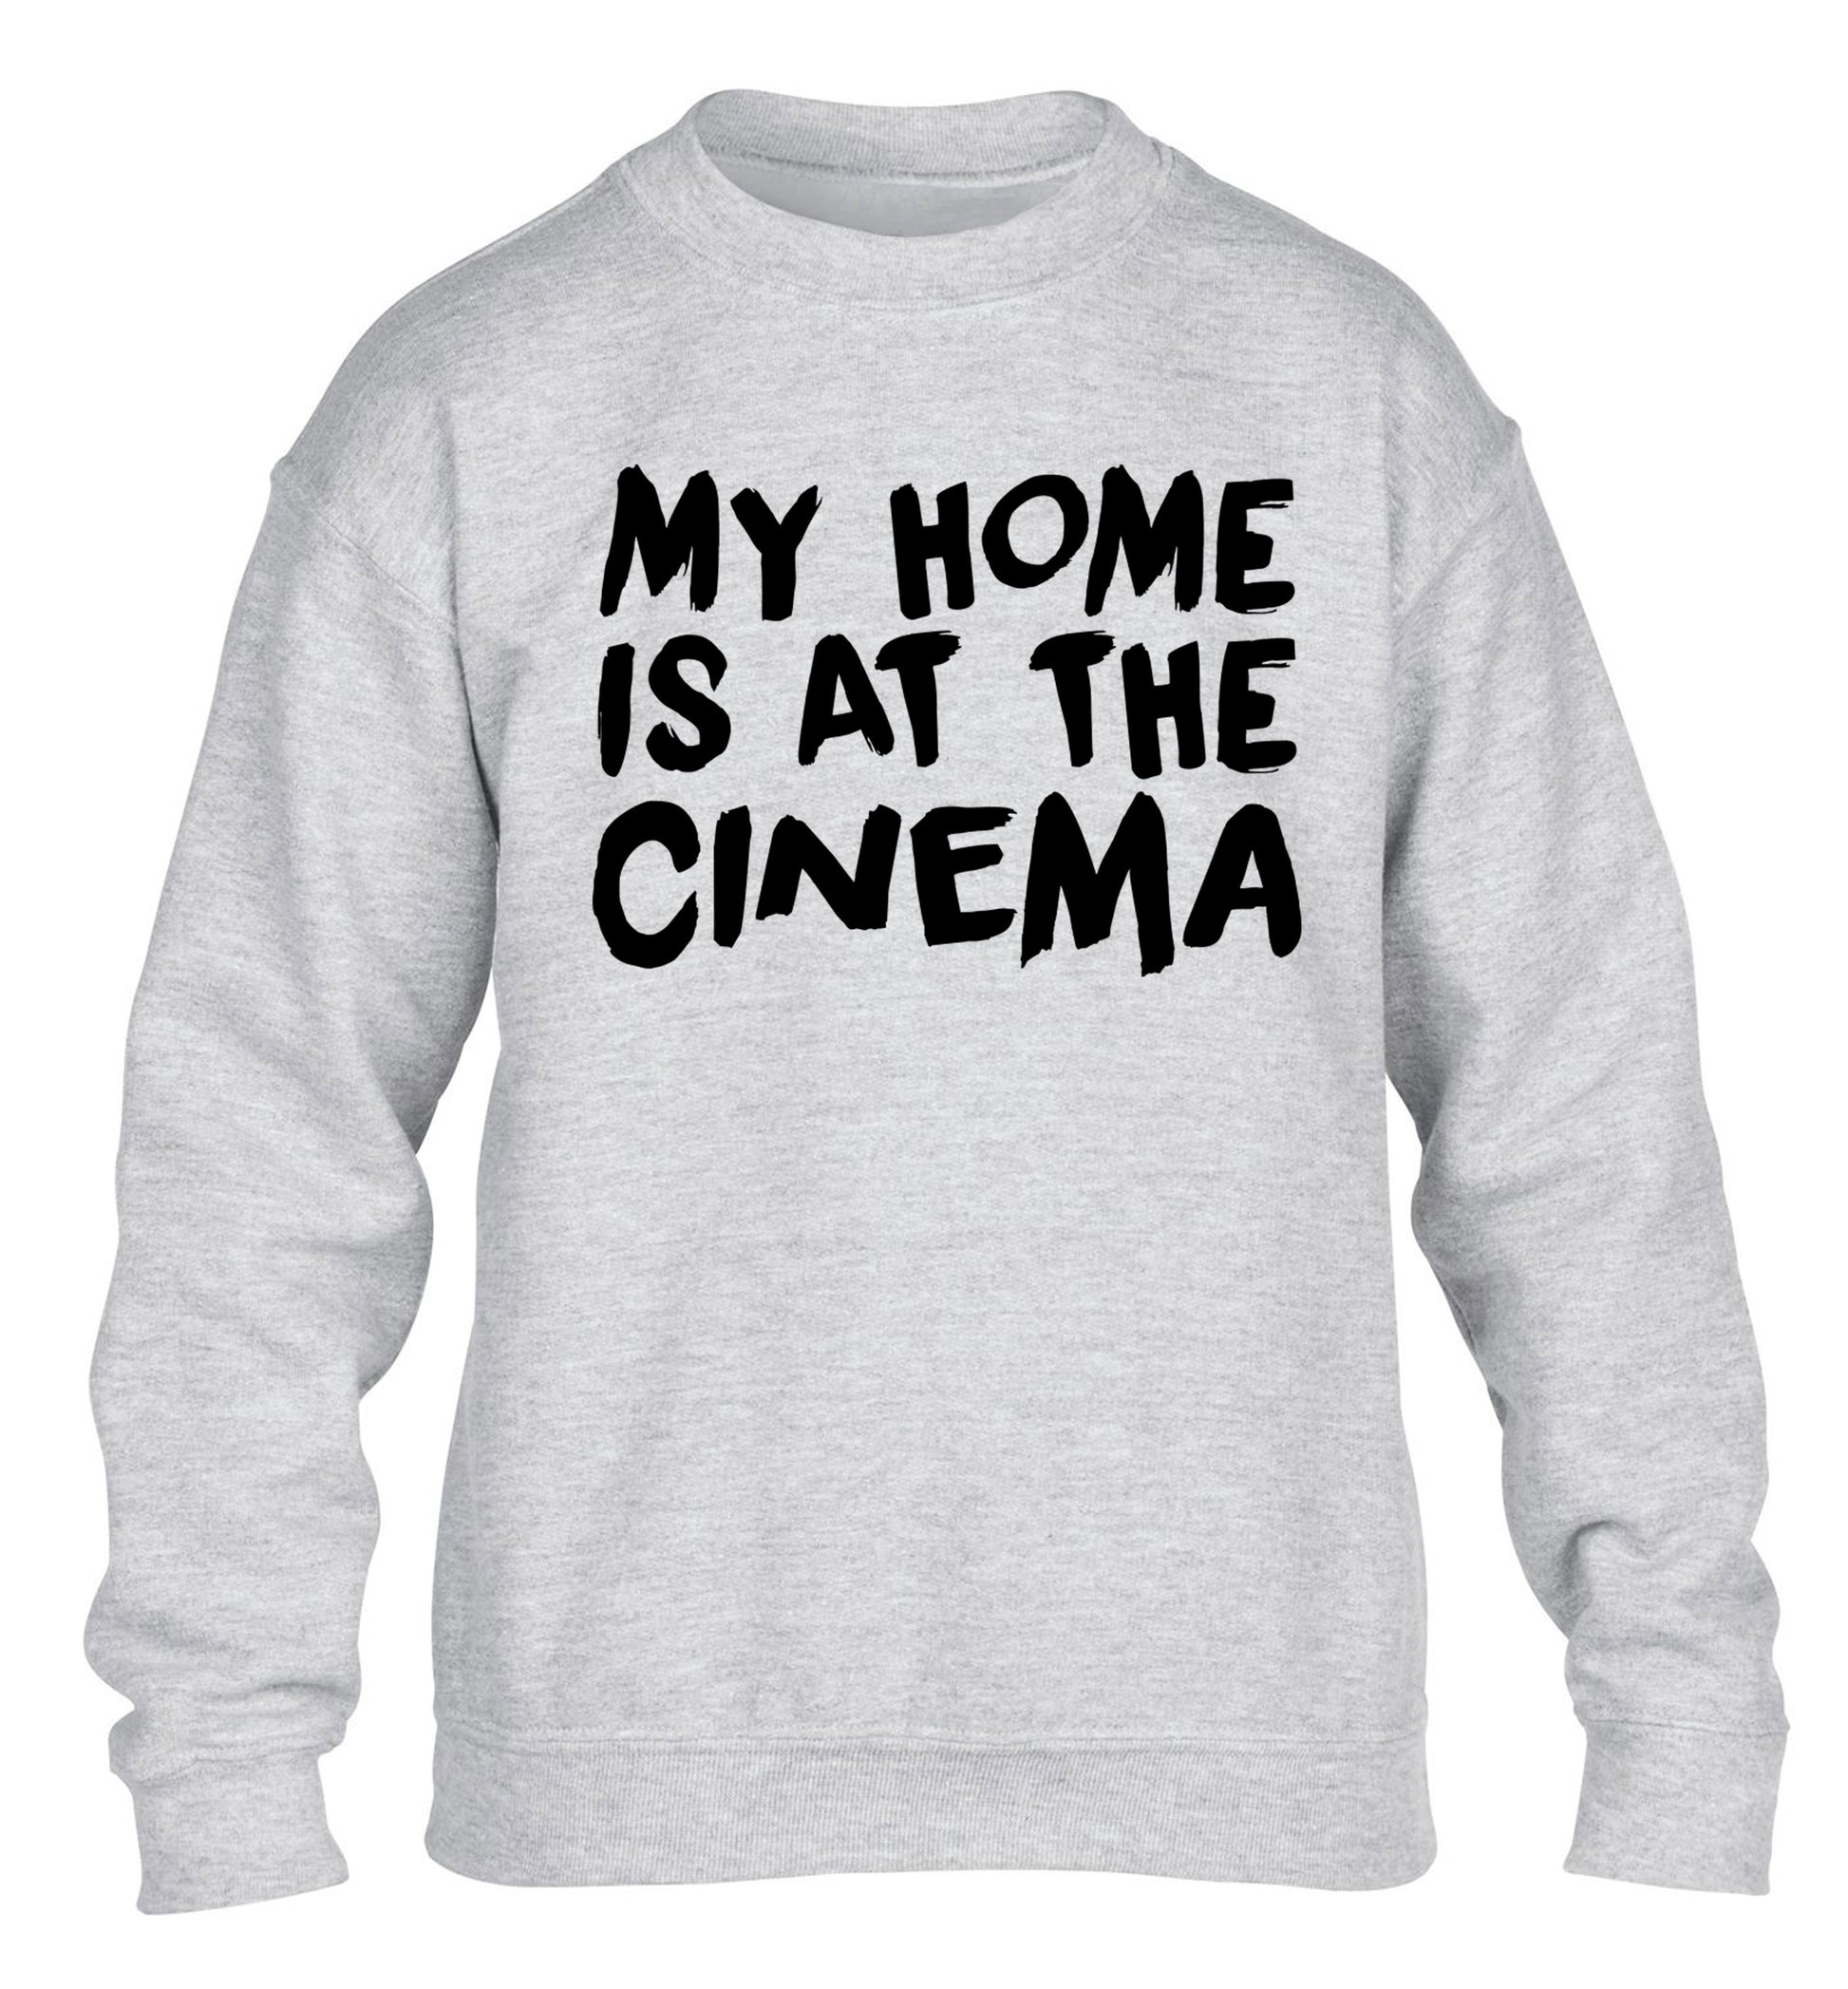 My home is at the cinema children's grey sweater 12-14 Years